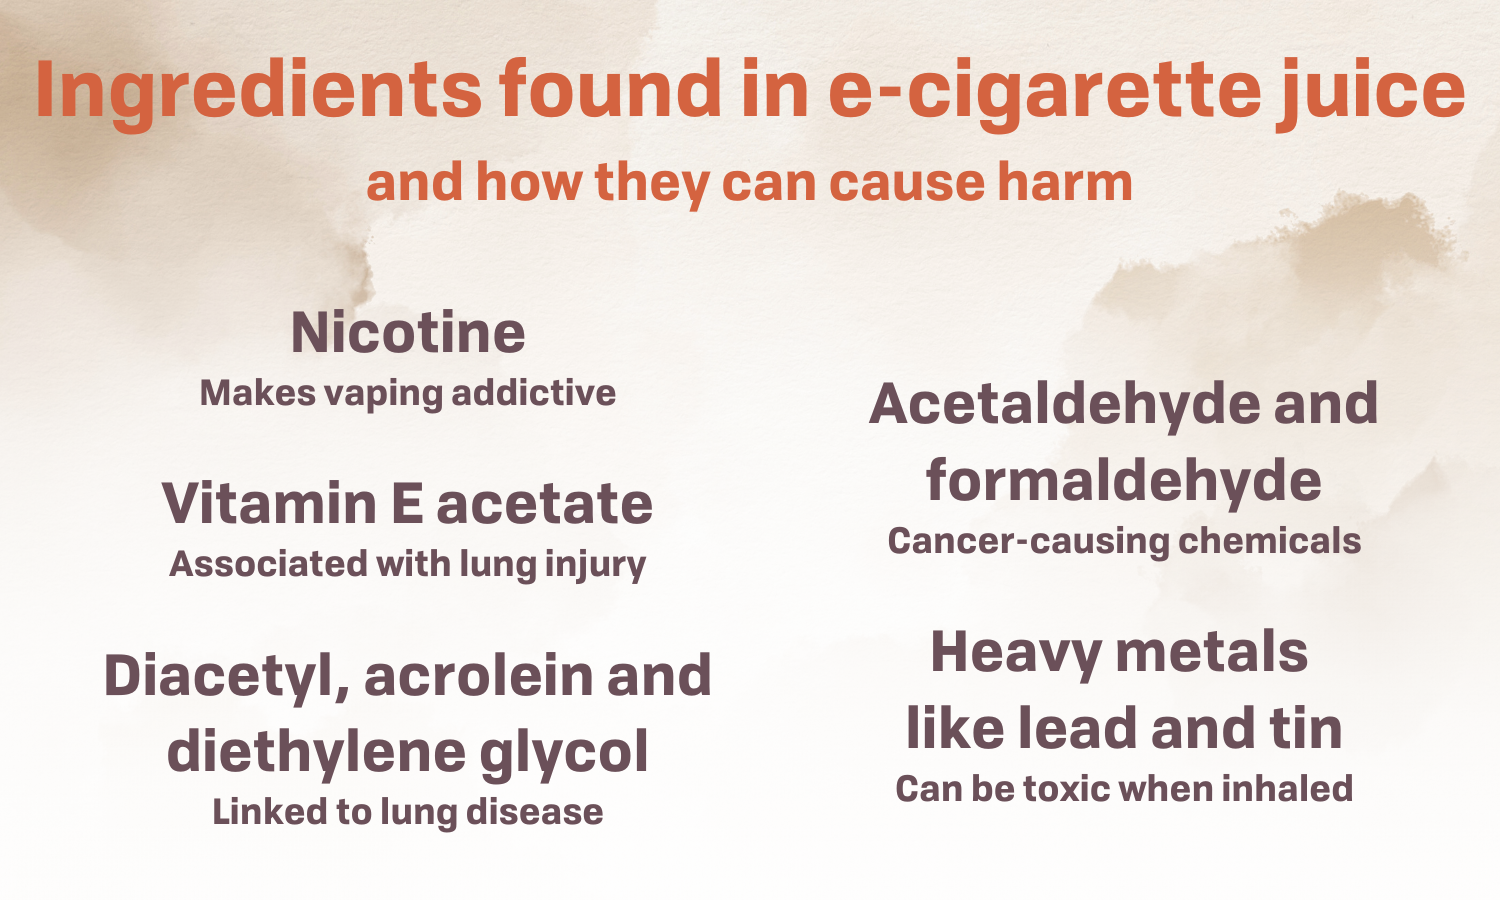 List of ingredients in e-cigarettes and their associated health impacts